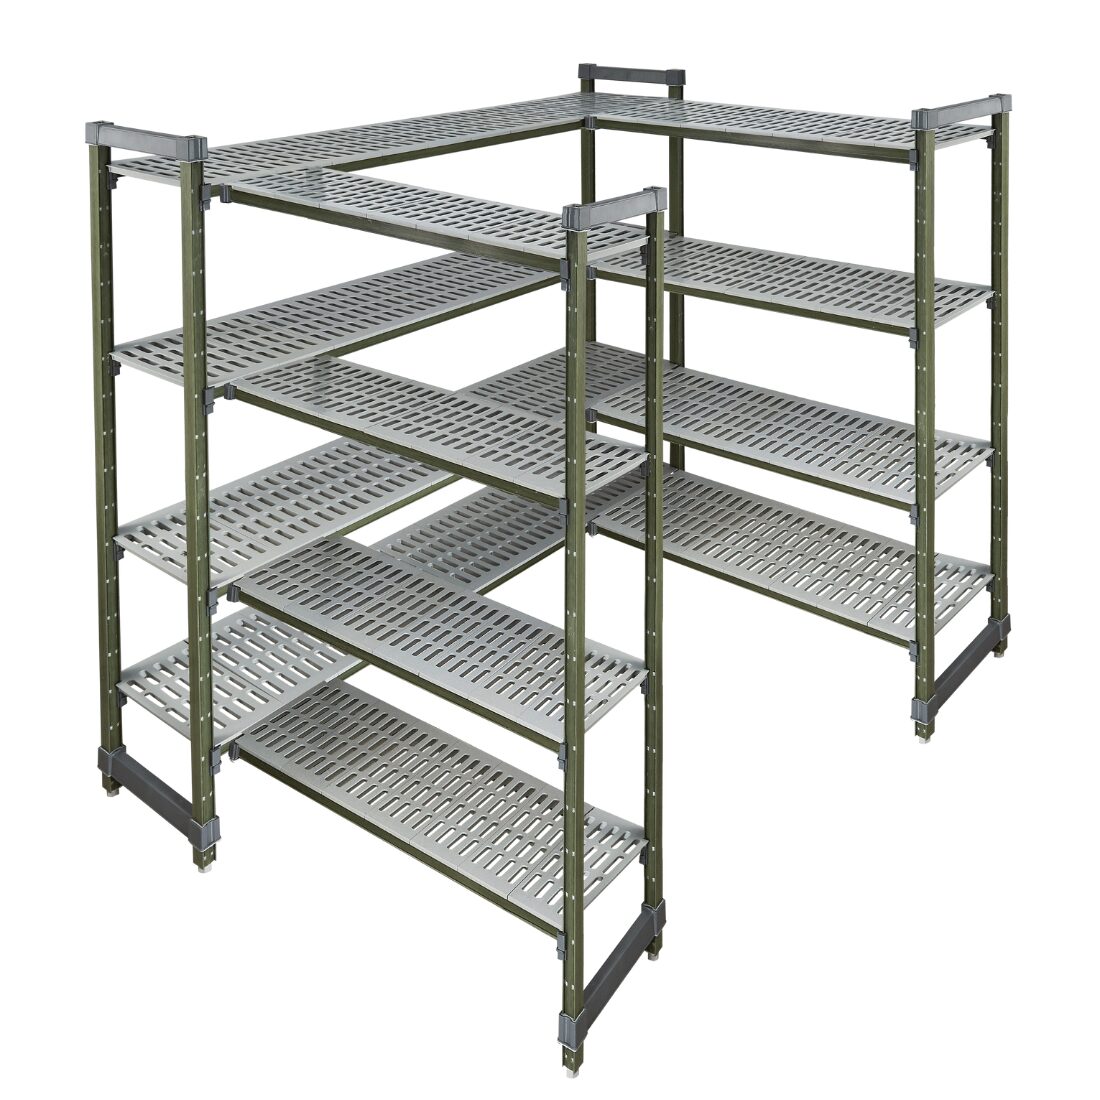 The Modular Systems Stainless Steel Over Shelf, crafted from 1.0mm thick 304-grade stainless steel, is a durable and versatile addition to any commercial kitchen. Its stainless steel legs and roun